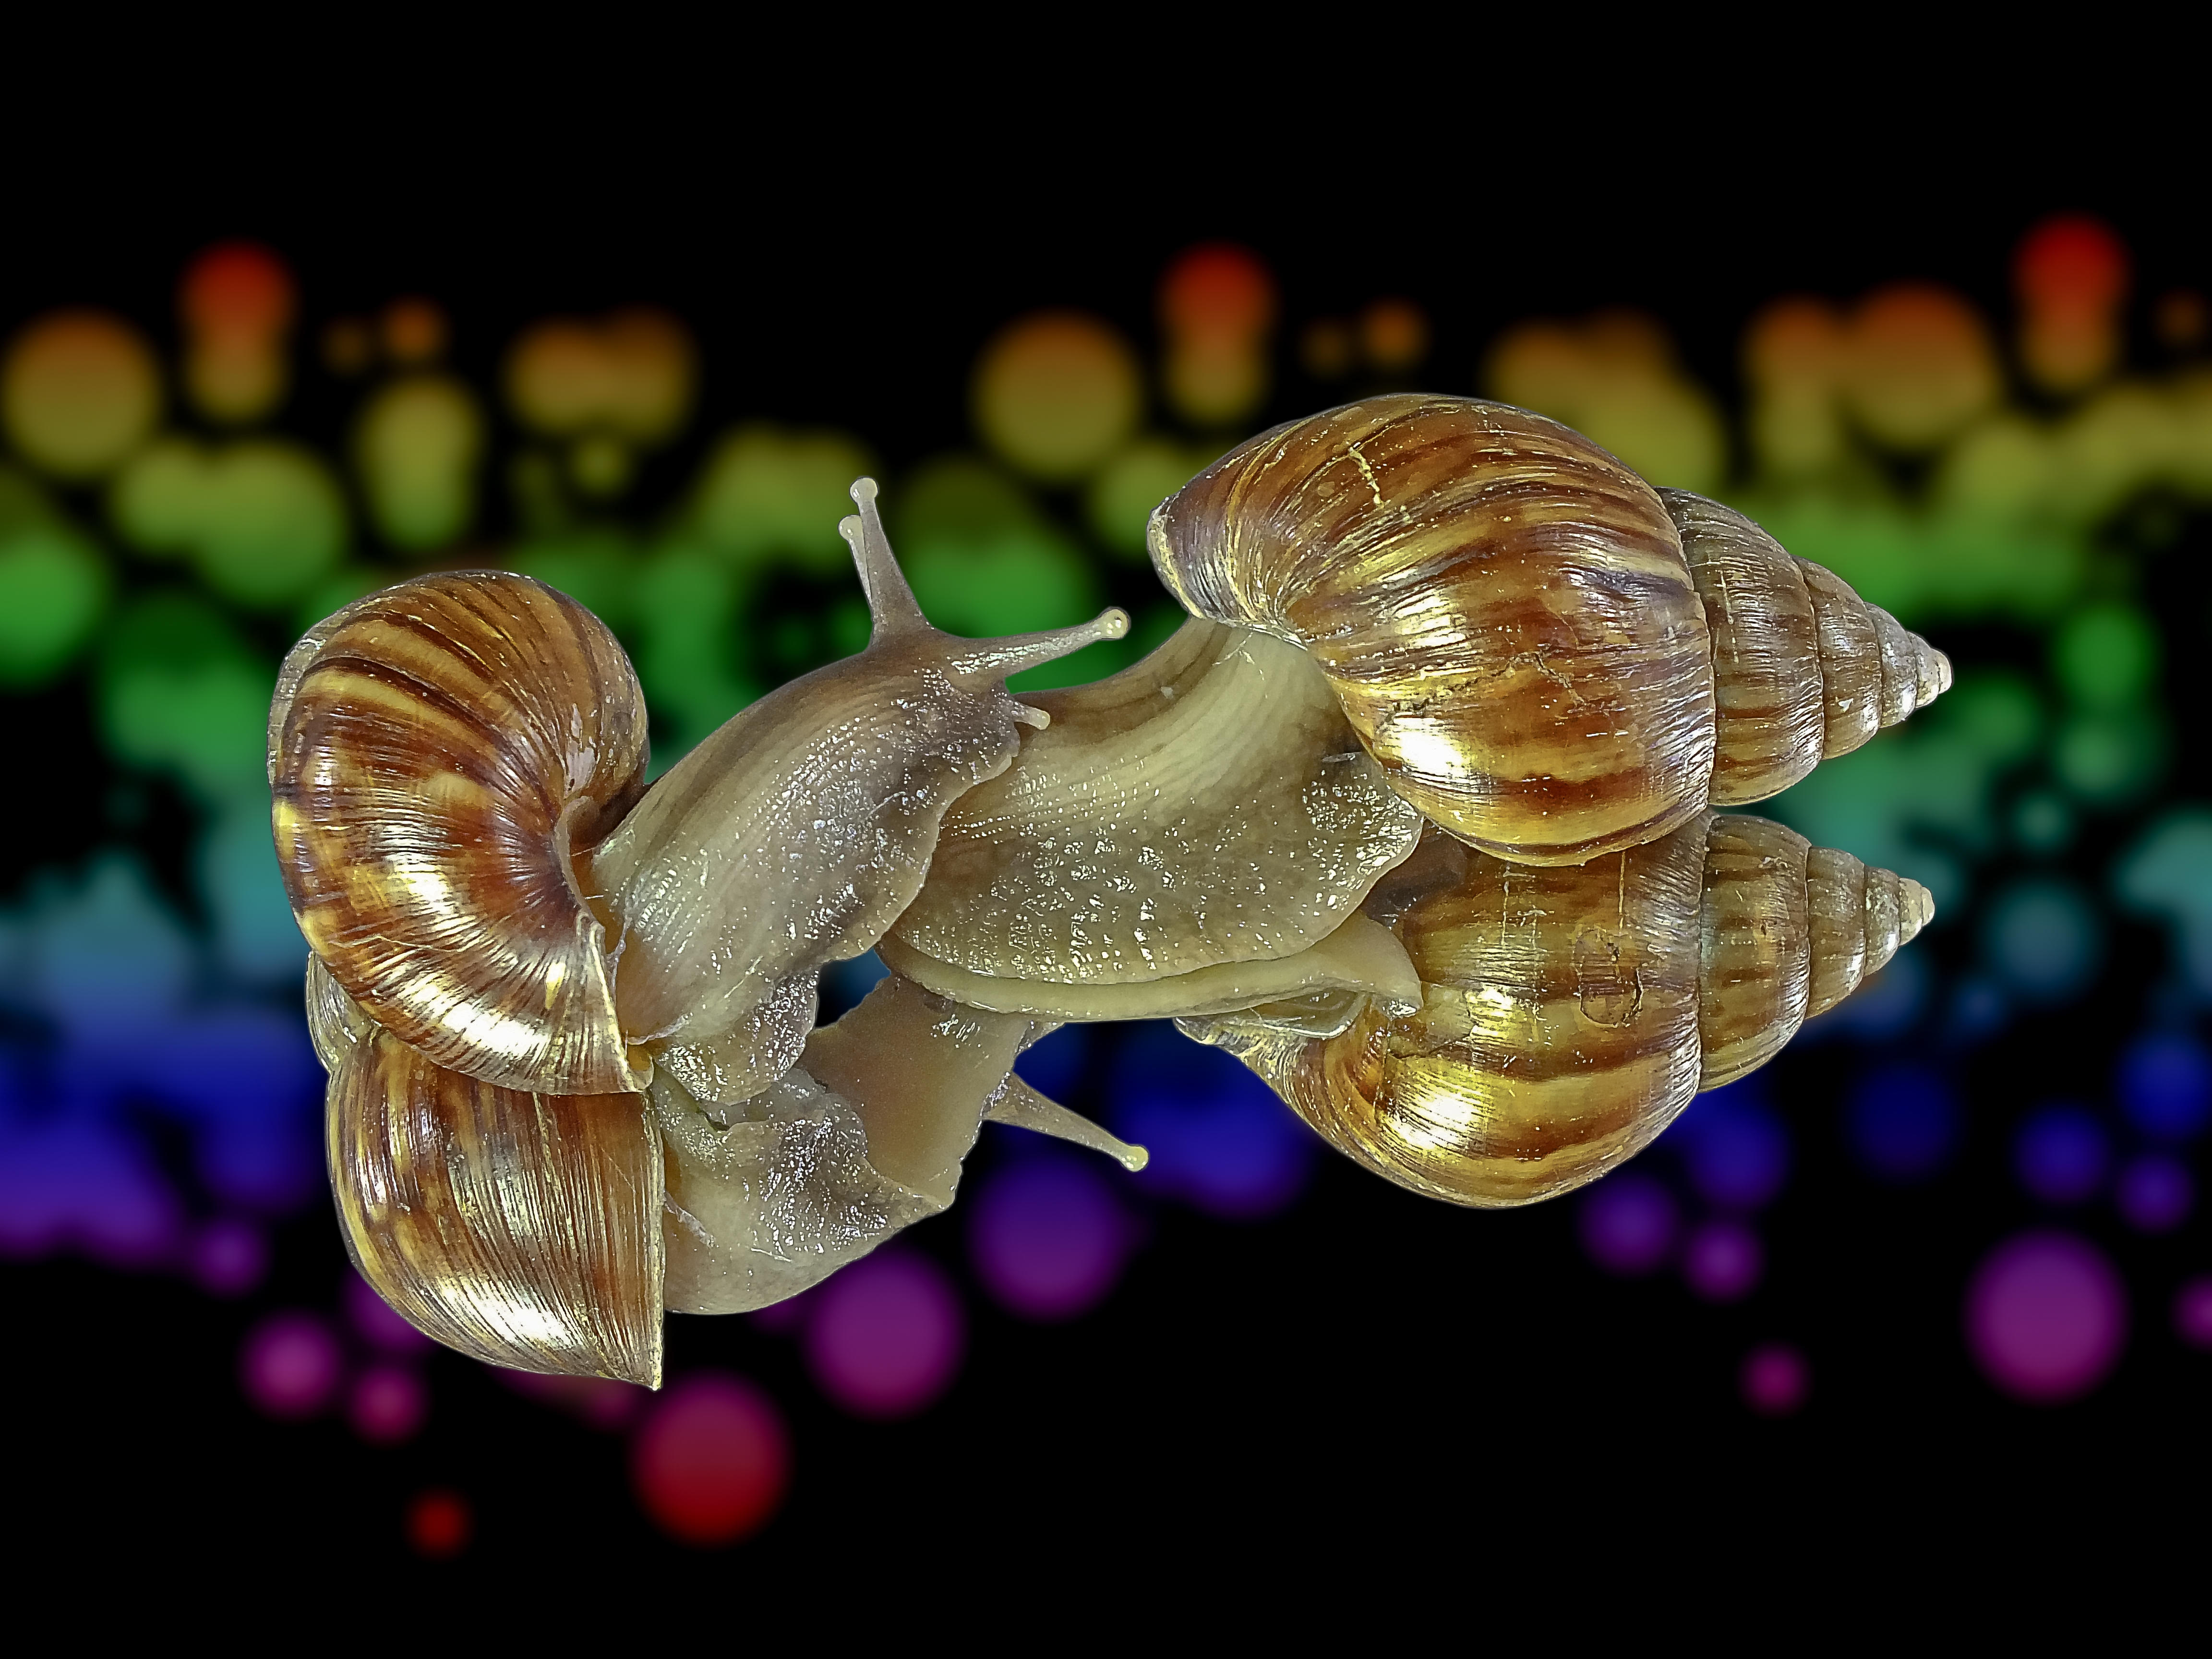 Wallpapers two snails snail insect on the desktop